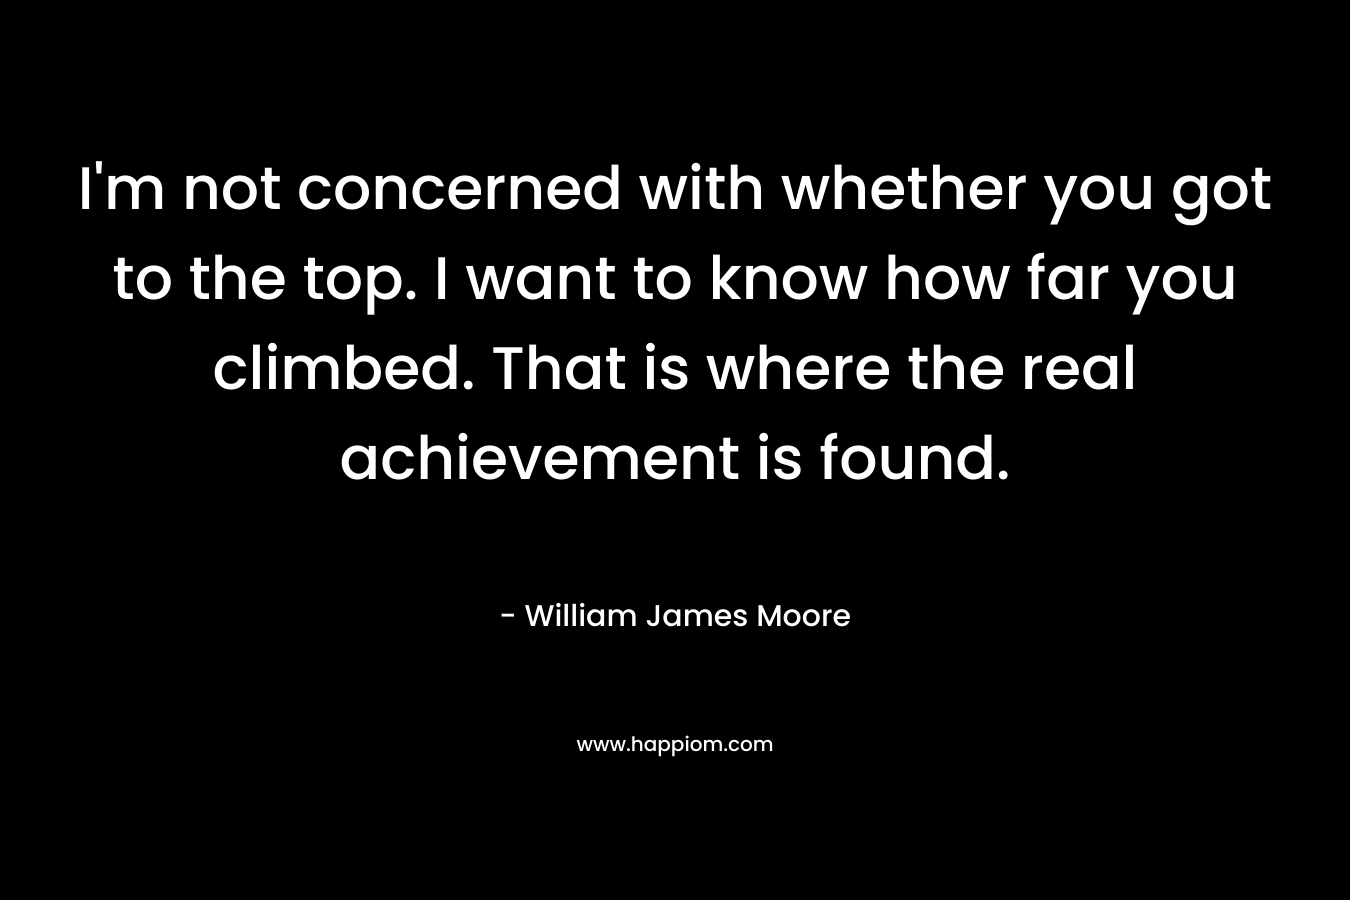 I’m not concerned with whether you got to the top. I want to know how far you climbed. That is where the real achievement is found. – William James Moore